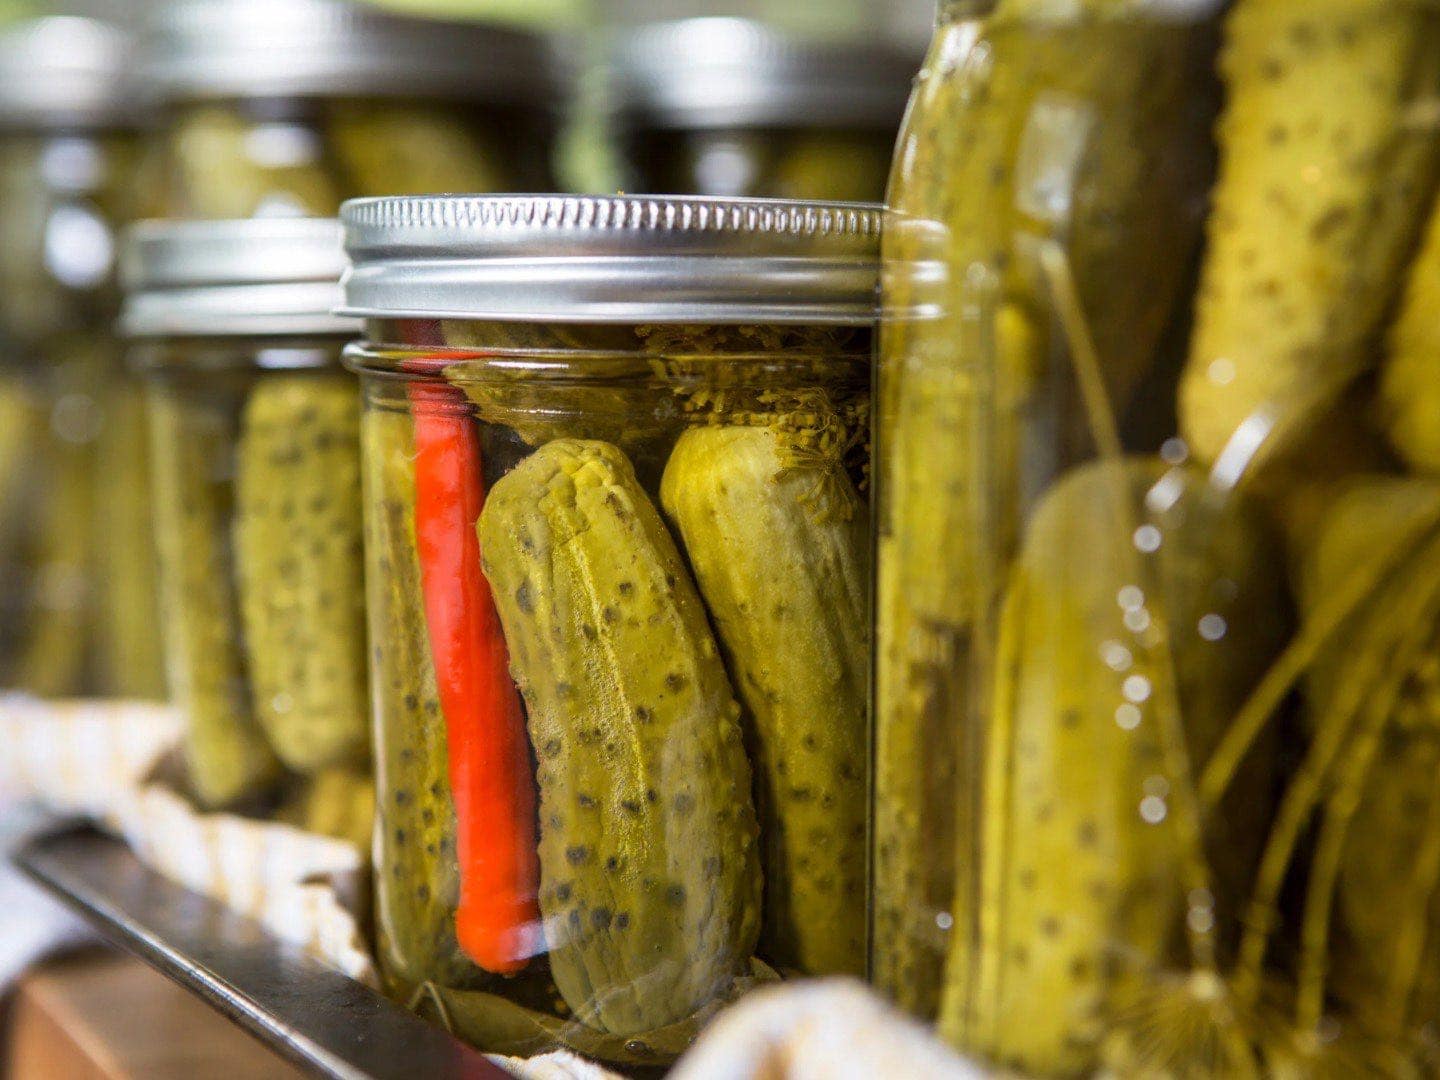 Many mason jars of are shown of varying sizes, each containing whole pickles. 